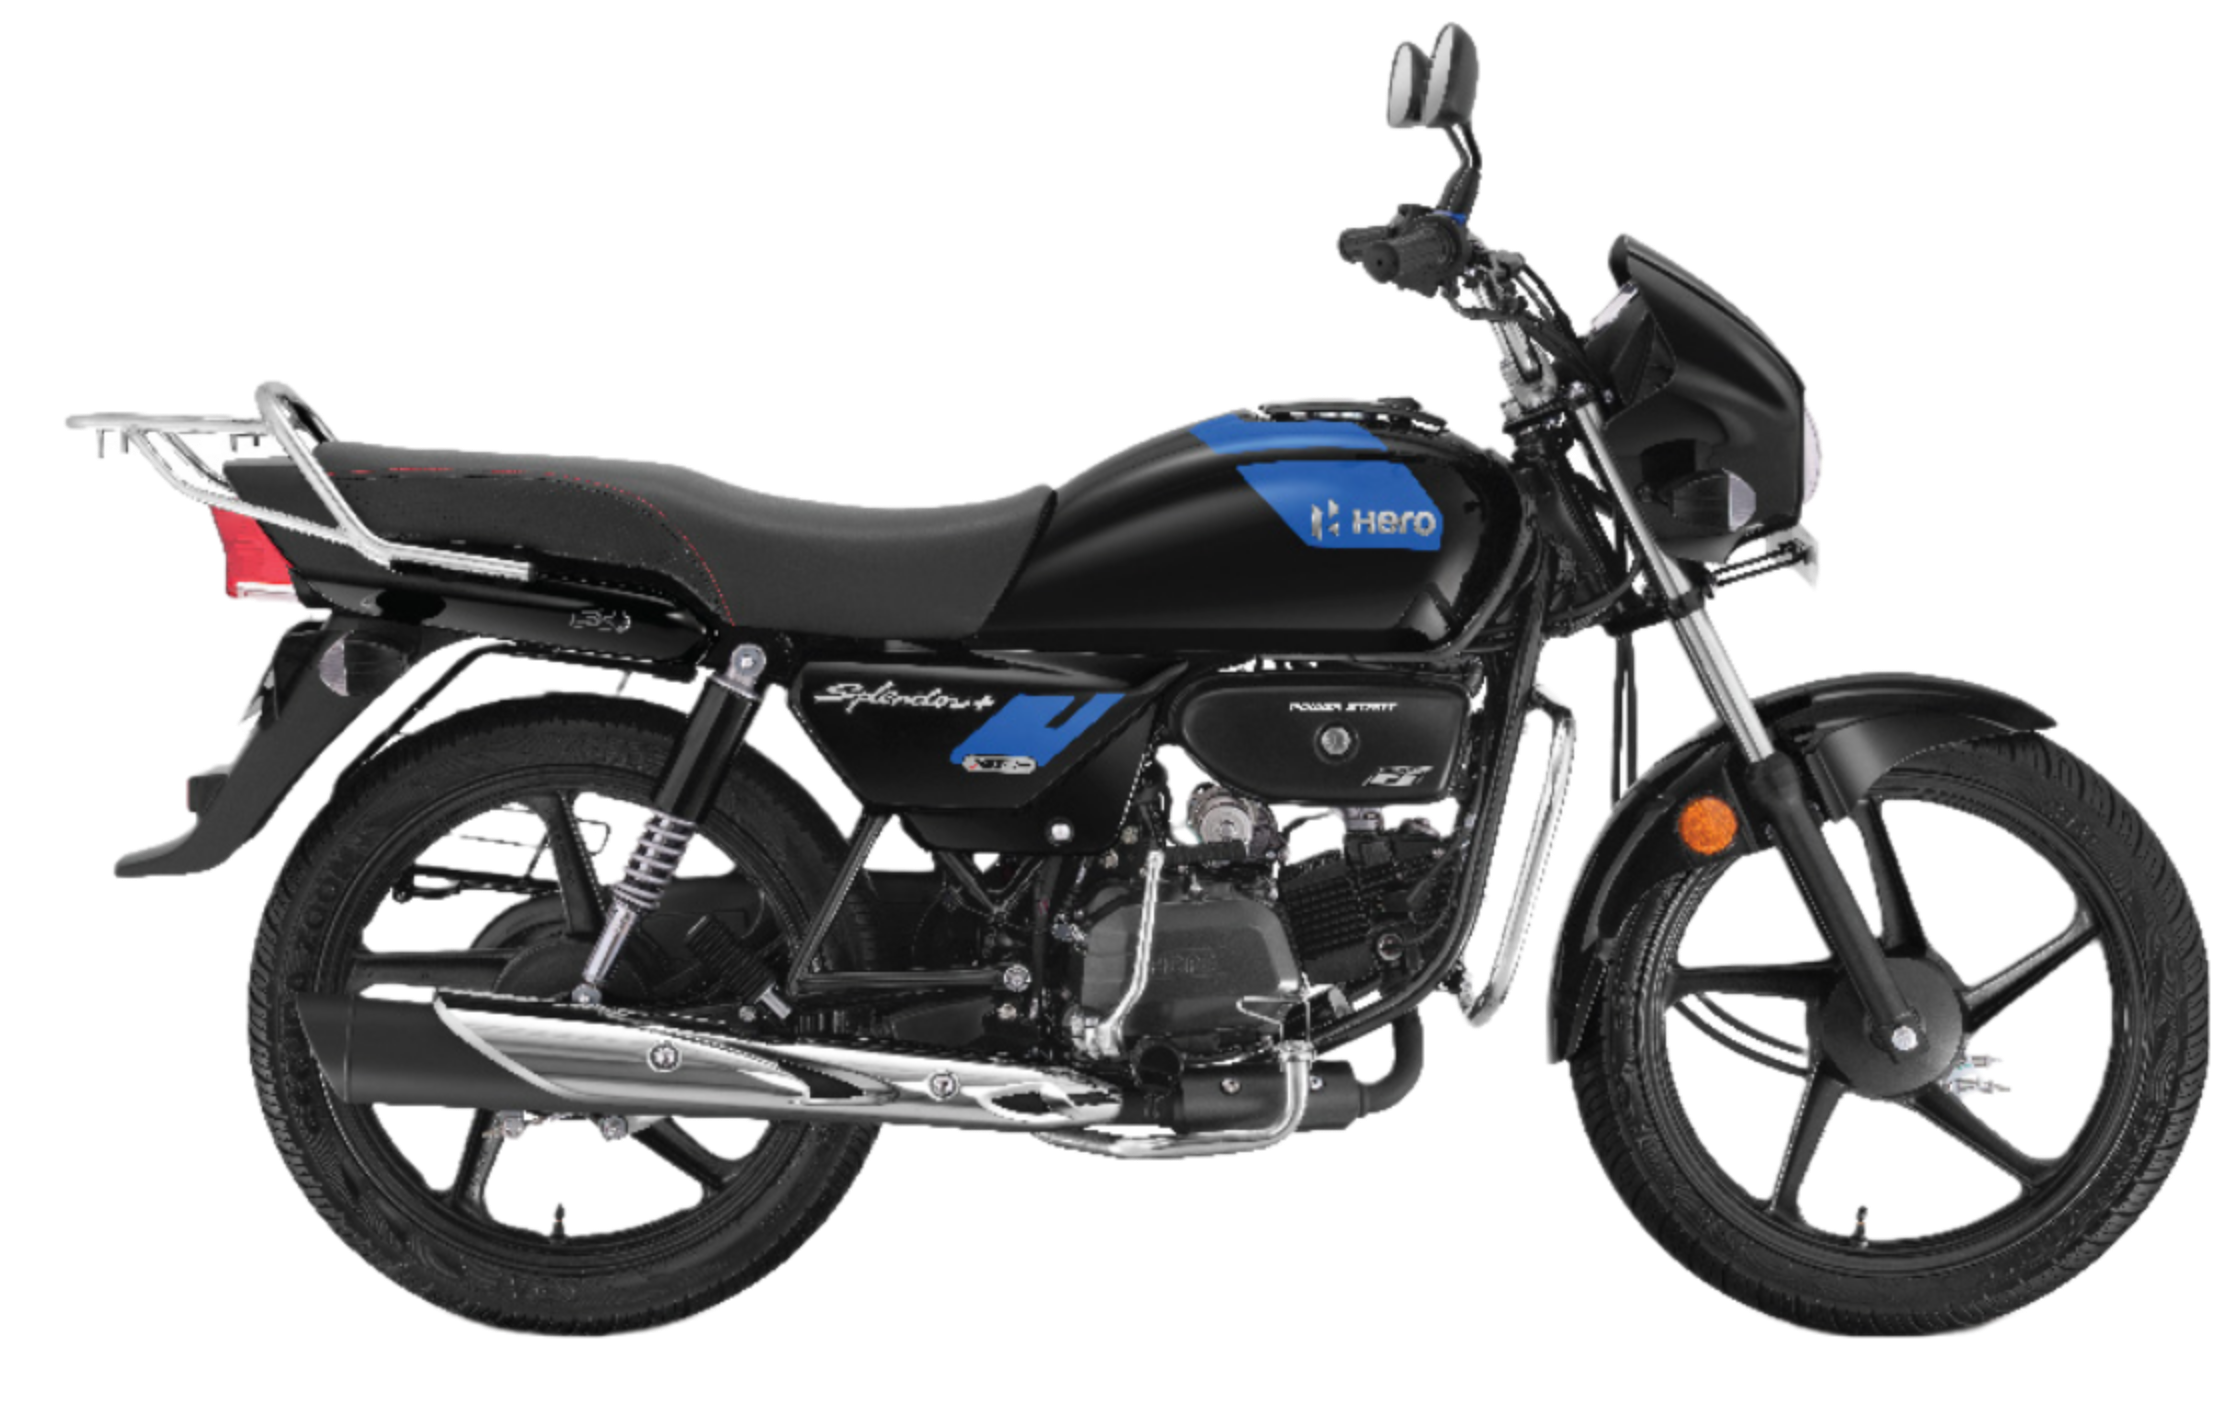 Title  The 2023 Hero Super Splendor XTEC BS6 II launched  New color and cosmetic upgrades.